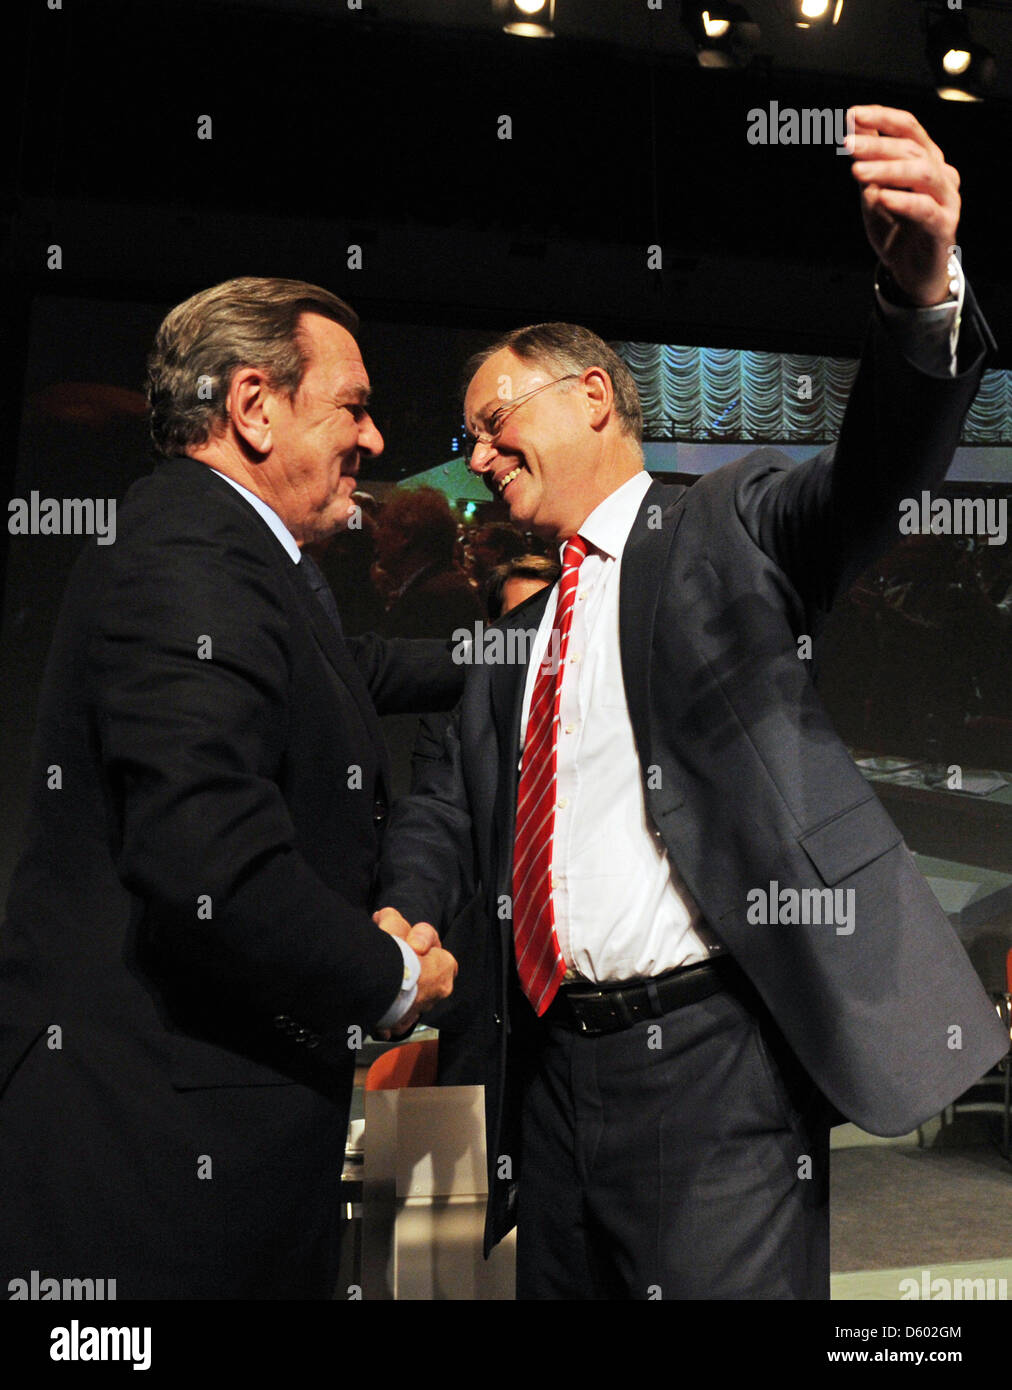 The SPD top candidate for the upcoming state parliament election in Lower Saxony, Stephan Weil (r), greets former Gemany chancellor Gerhard Schroeder (l) during the state party meeting of the Lower Saxonian Social Democrats in Wolfsburg, Germany, 10 November 2012. Two months before the elections, the party will agree on their electoral program. Photo: JOCHEN LUEBKE Stock Photo